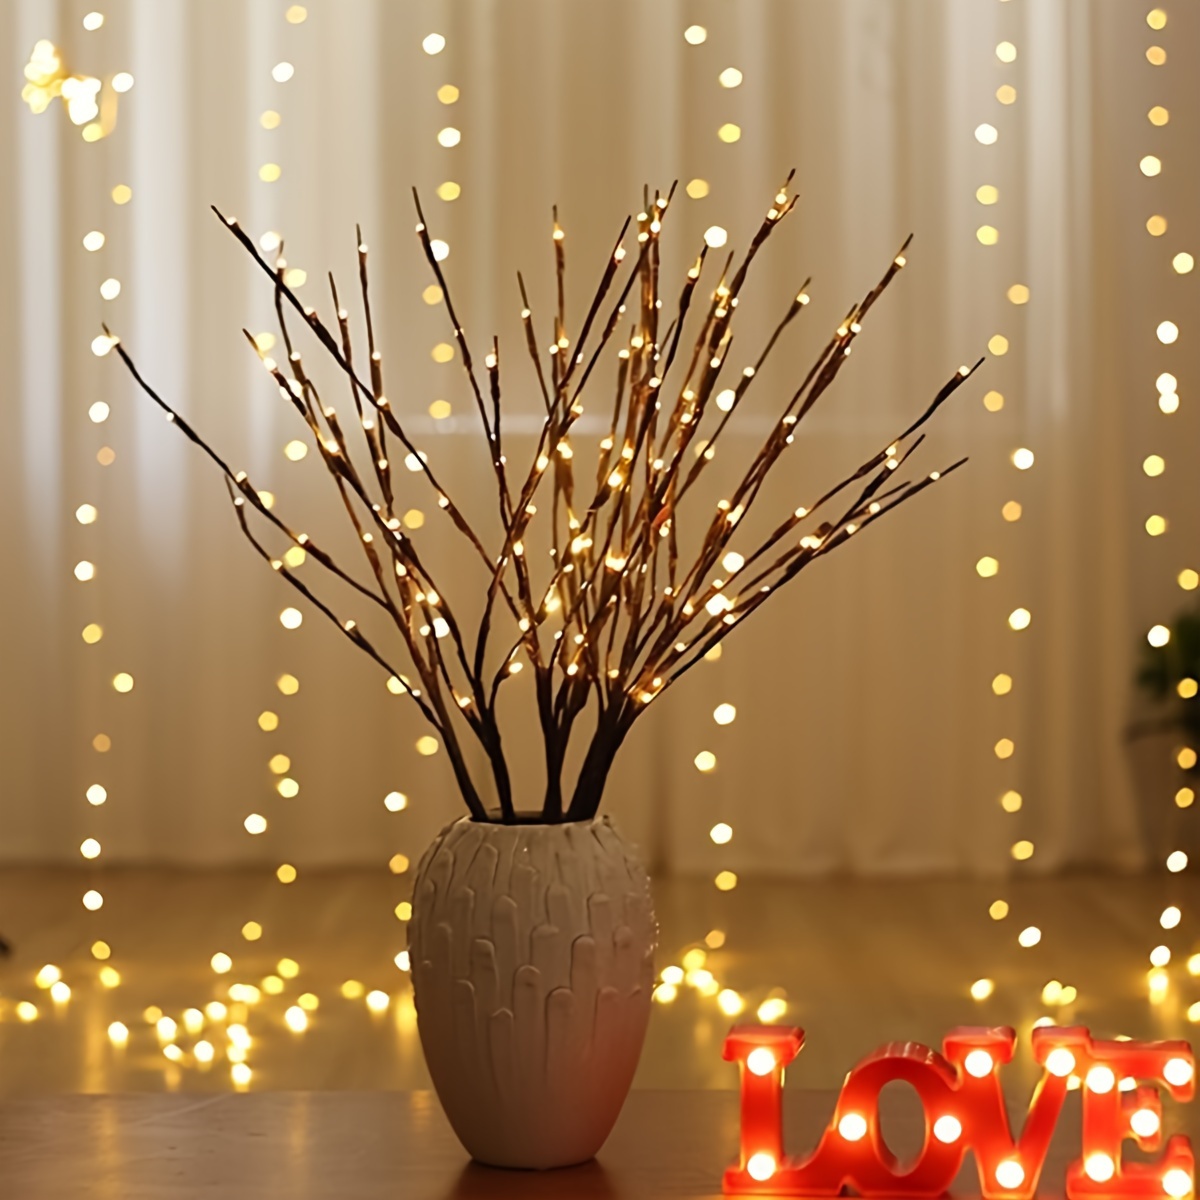 1pc led simulation branch string light creative branch lights star night lights room decorative tree lights for home party holiday wedding decoration for halloween christmas new year decoration details 3